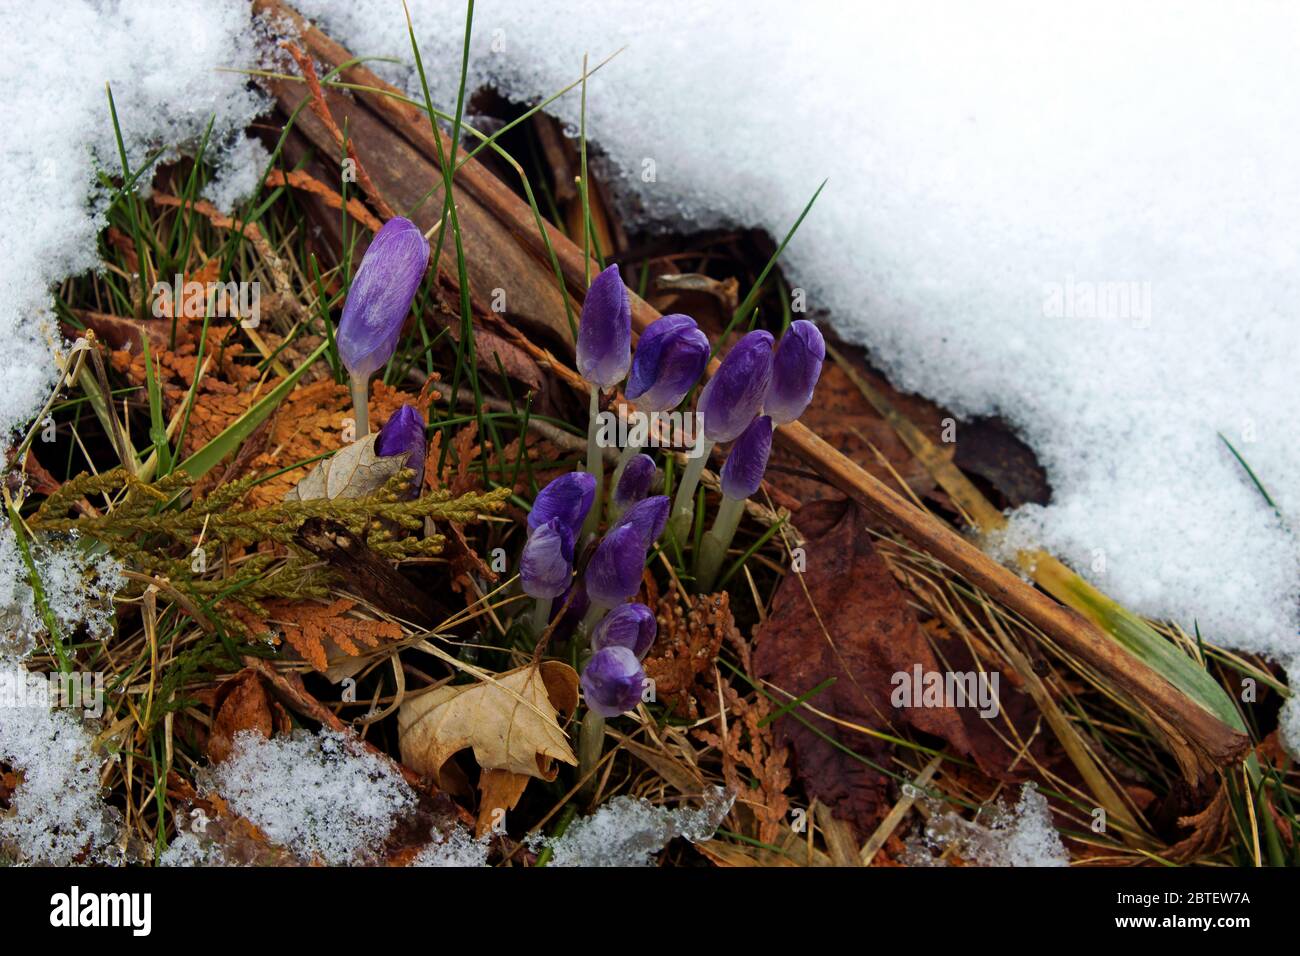 Crocus blooming at the end of winter with snow and ground litter Stock Photo